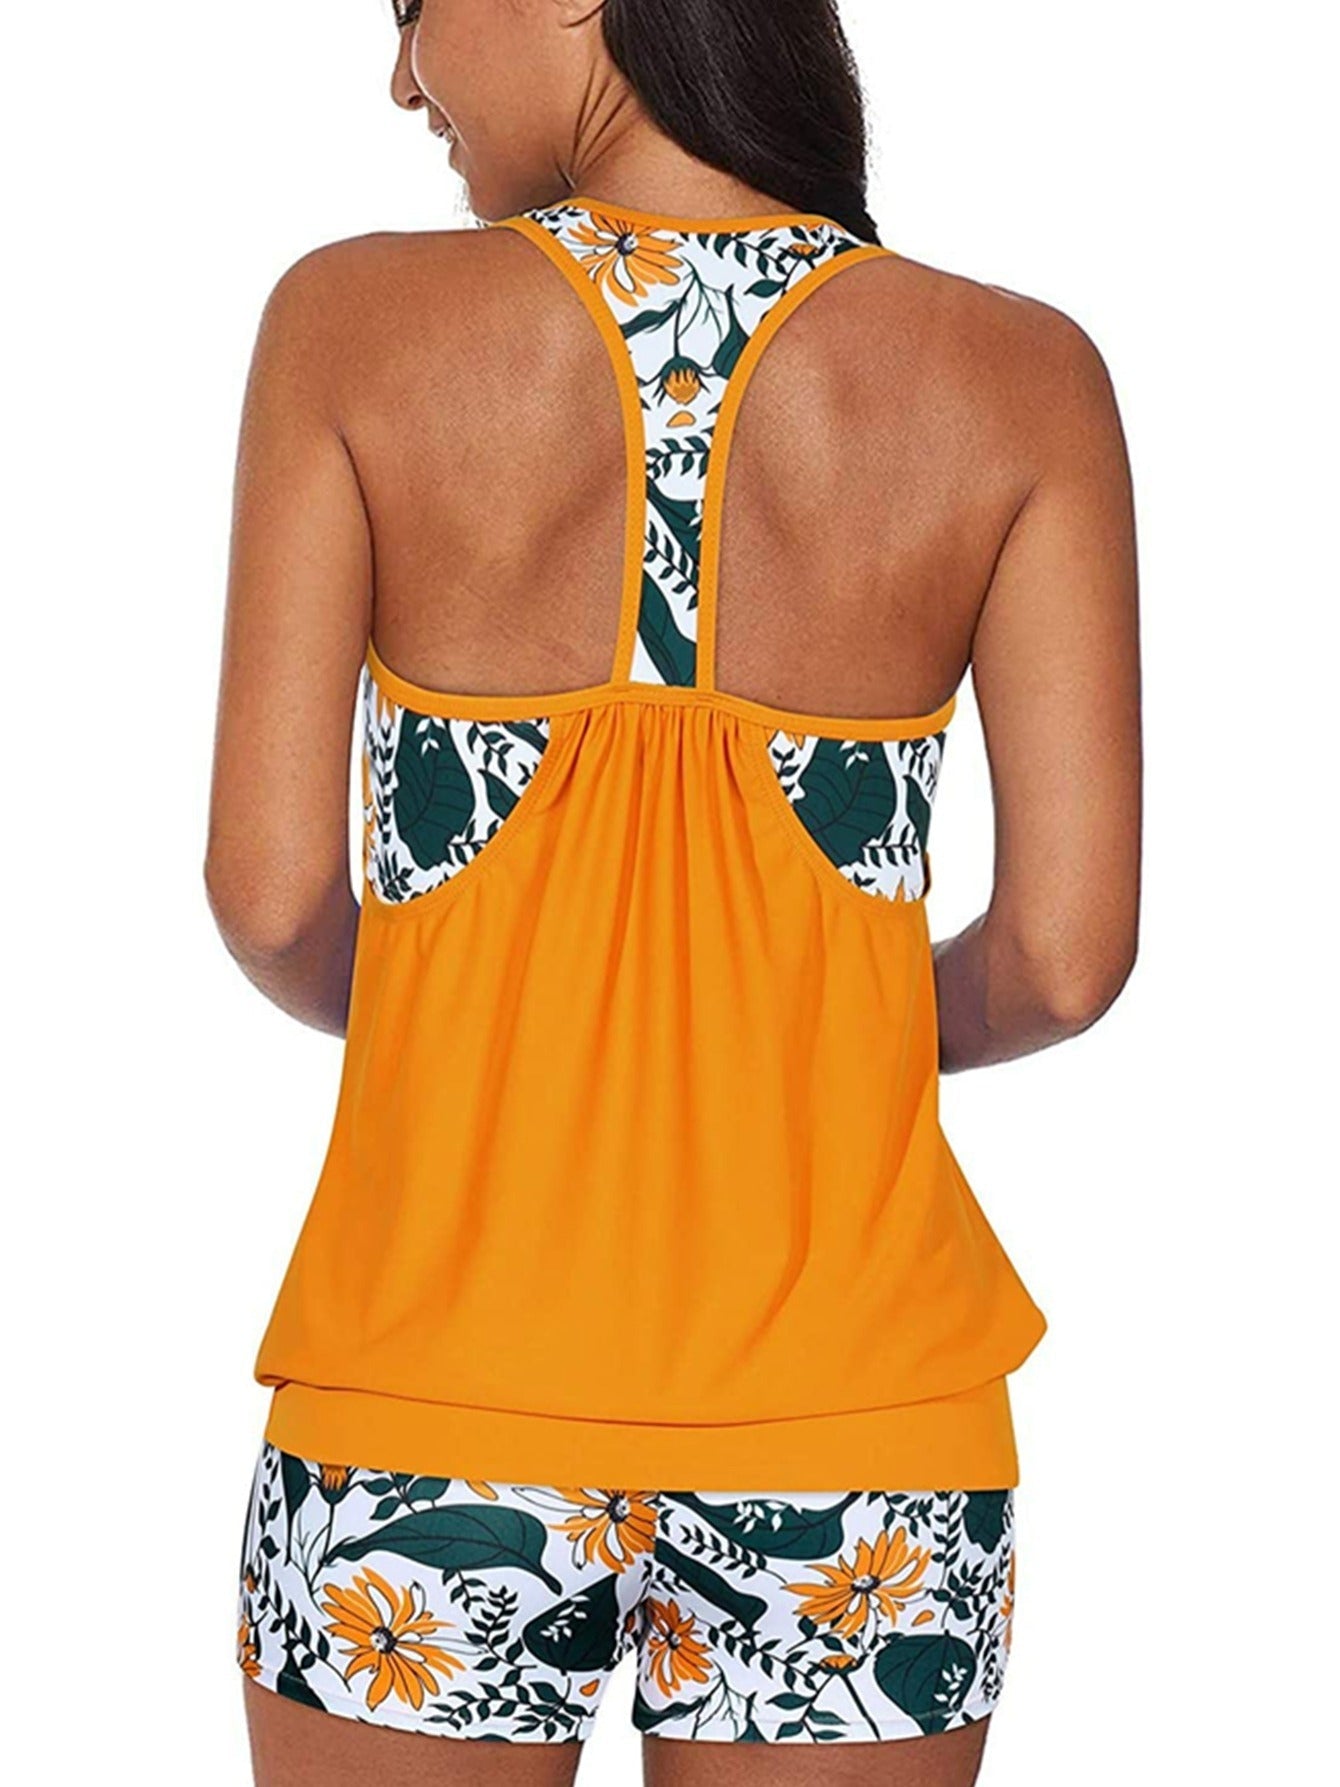 Women's Two Piece Tankini Swimsuits, Swim Tops With Tummy Control Shorts